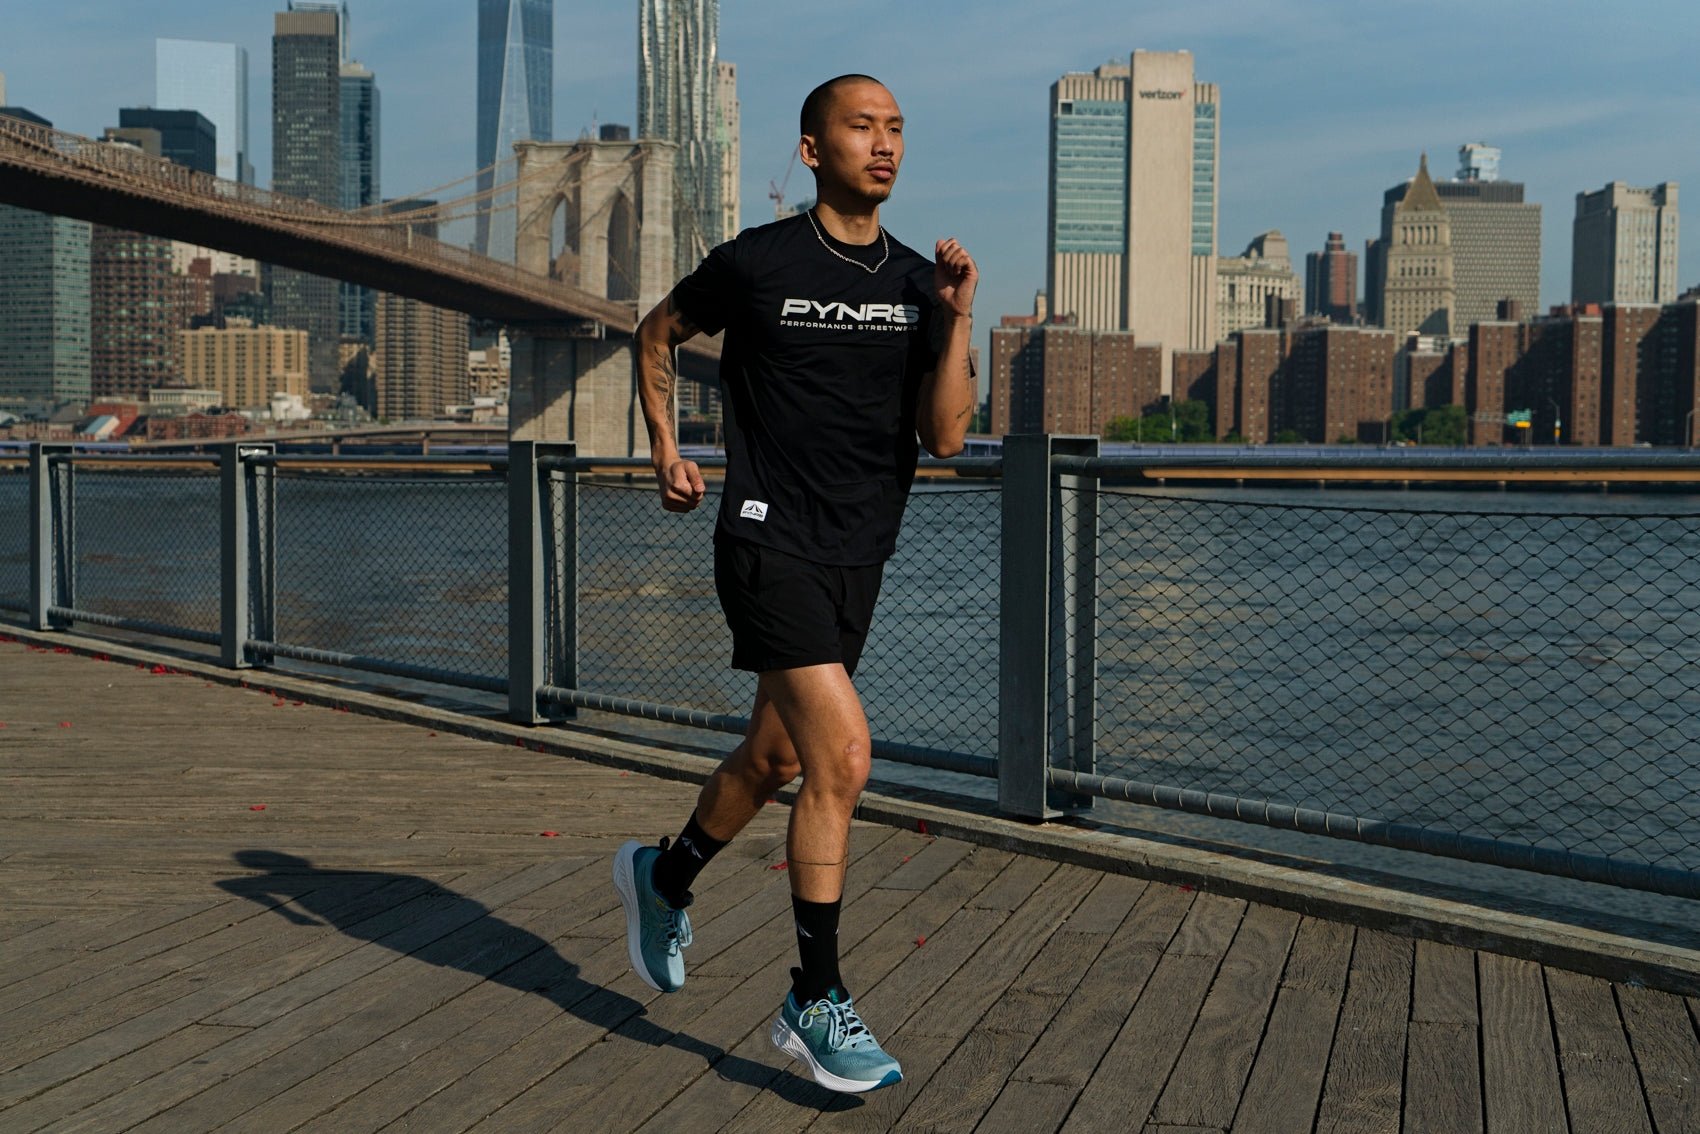 Why Breathable Fabrics are Essential for a good Running Experience – PYNRS  Performance Streetwear